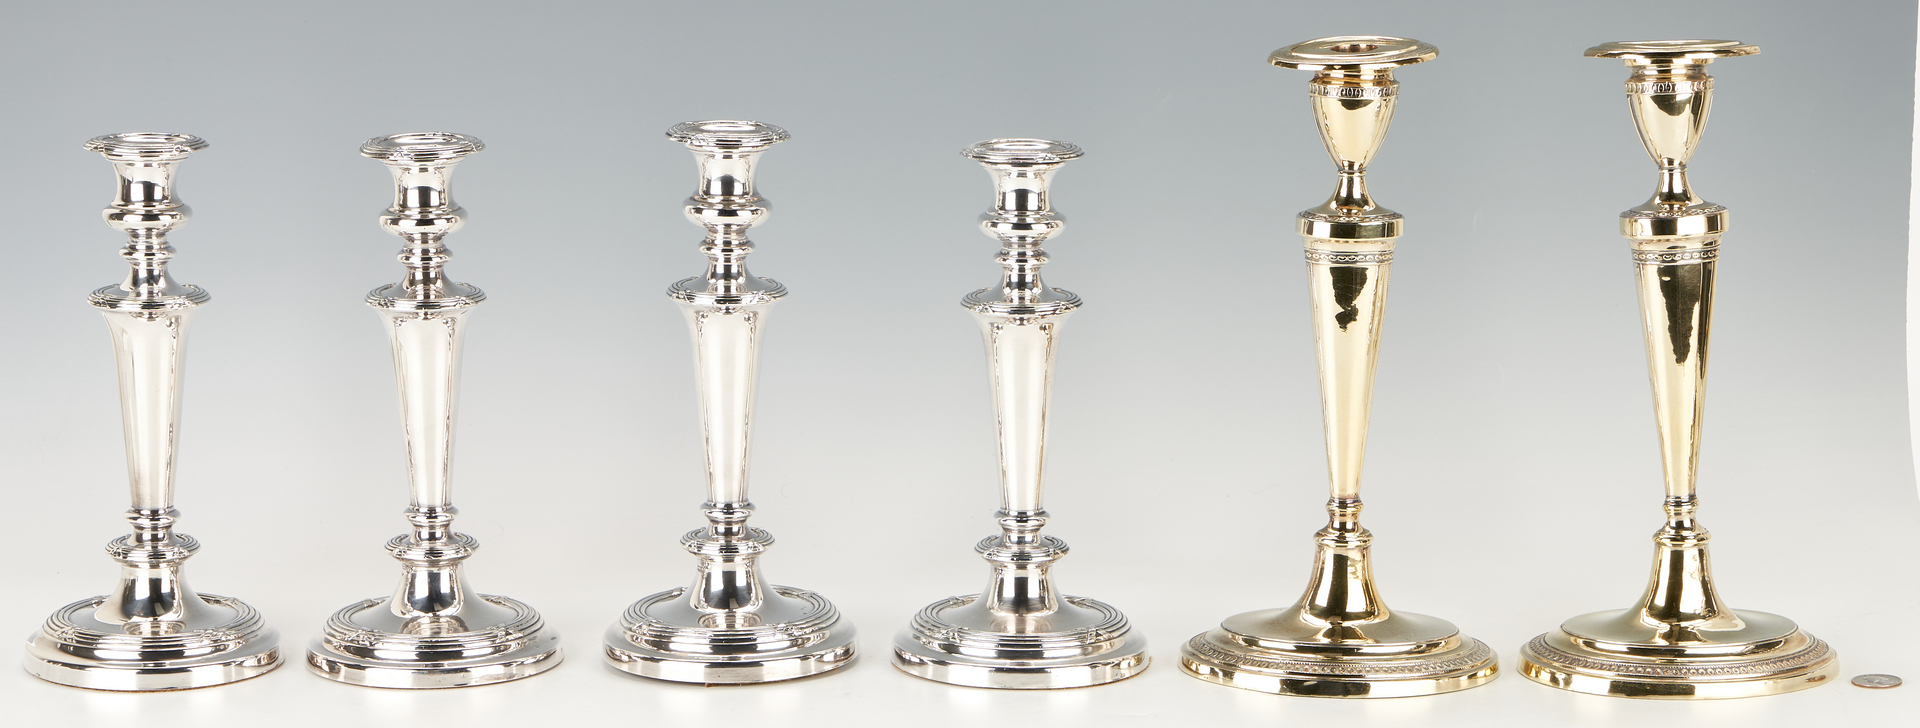 Lot 1169: Group of Candelabra & Candlesticks, 8 Items, incl. Old Sheffield